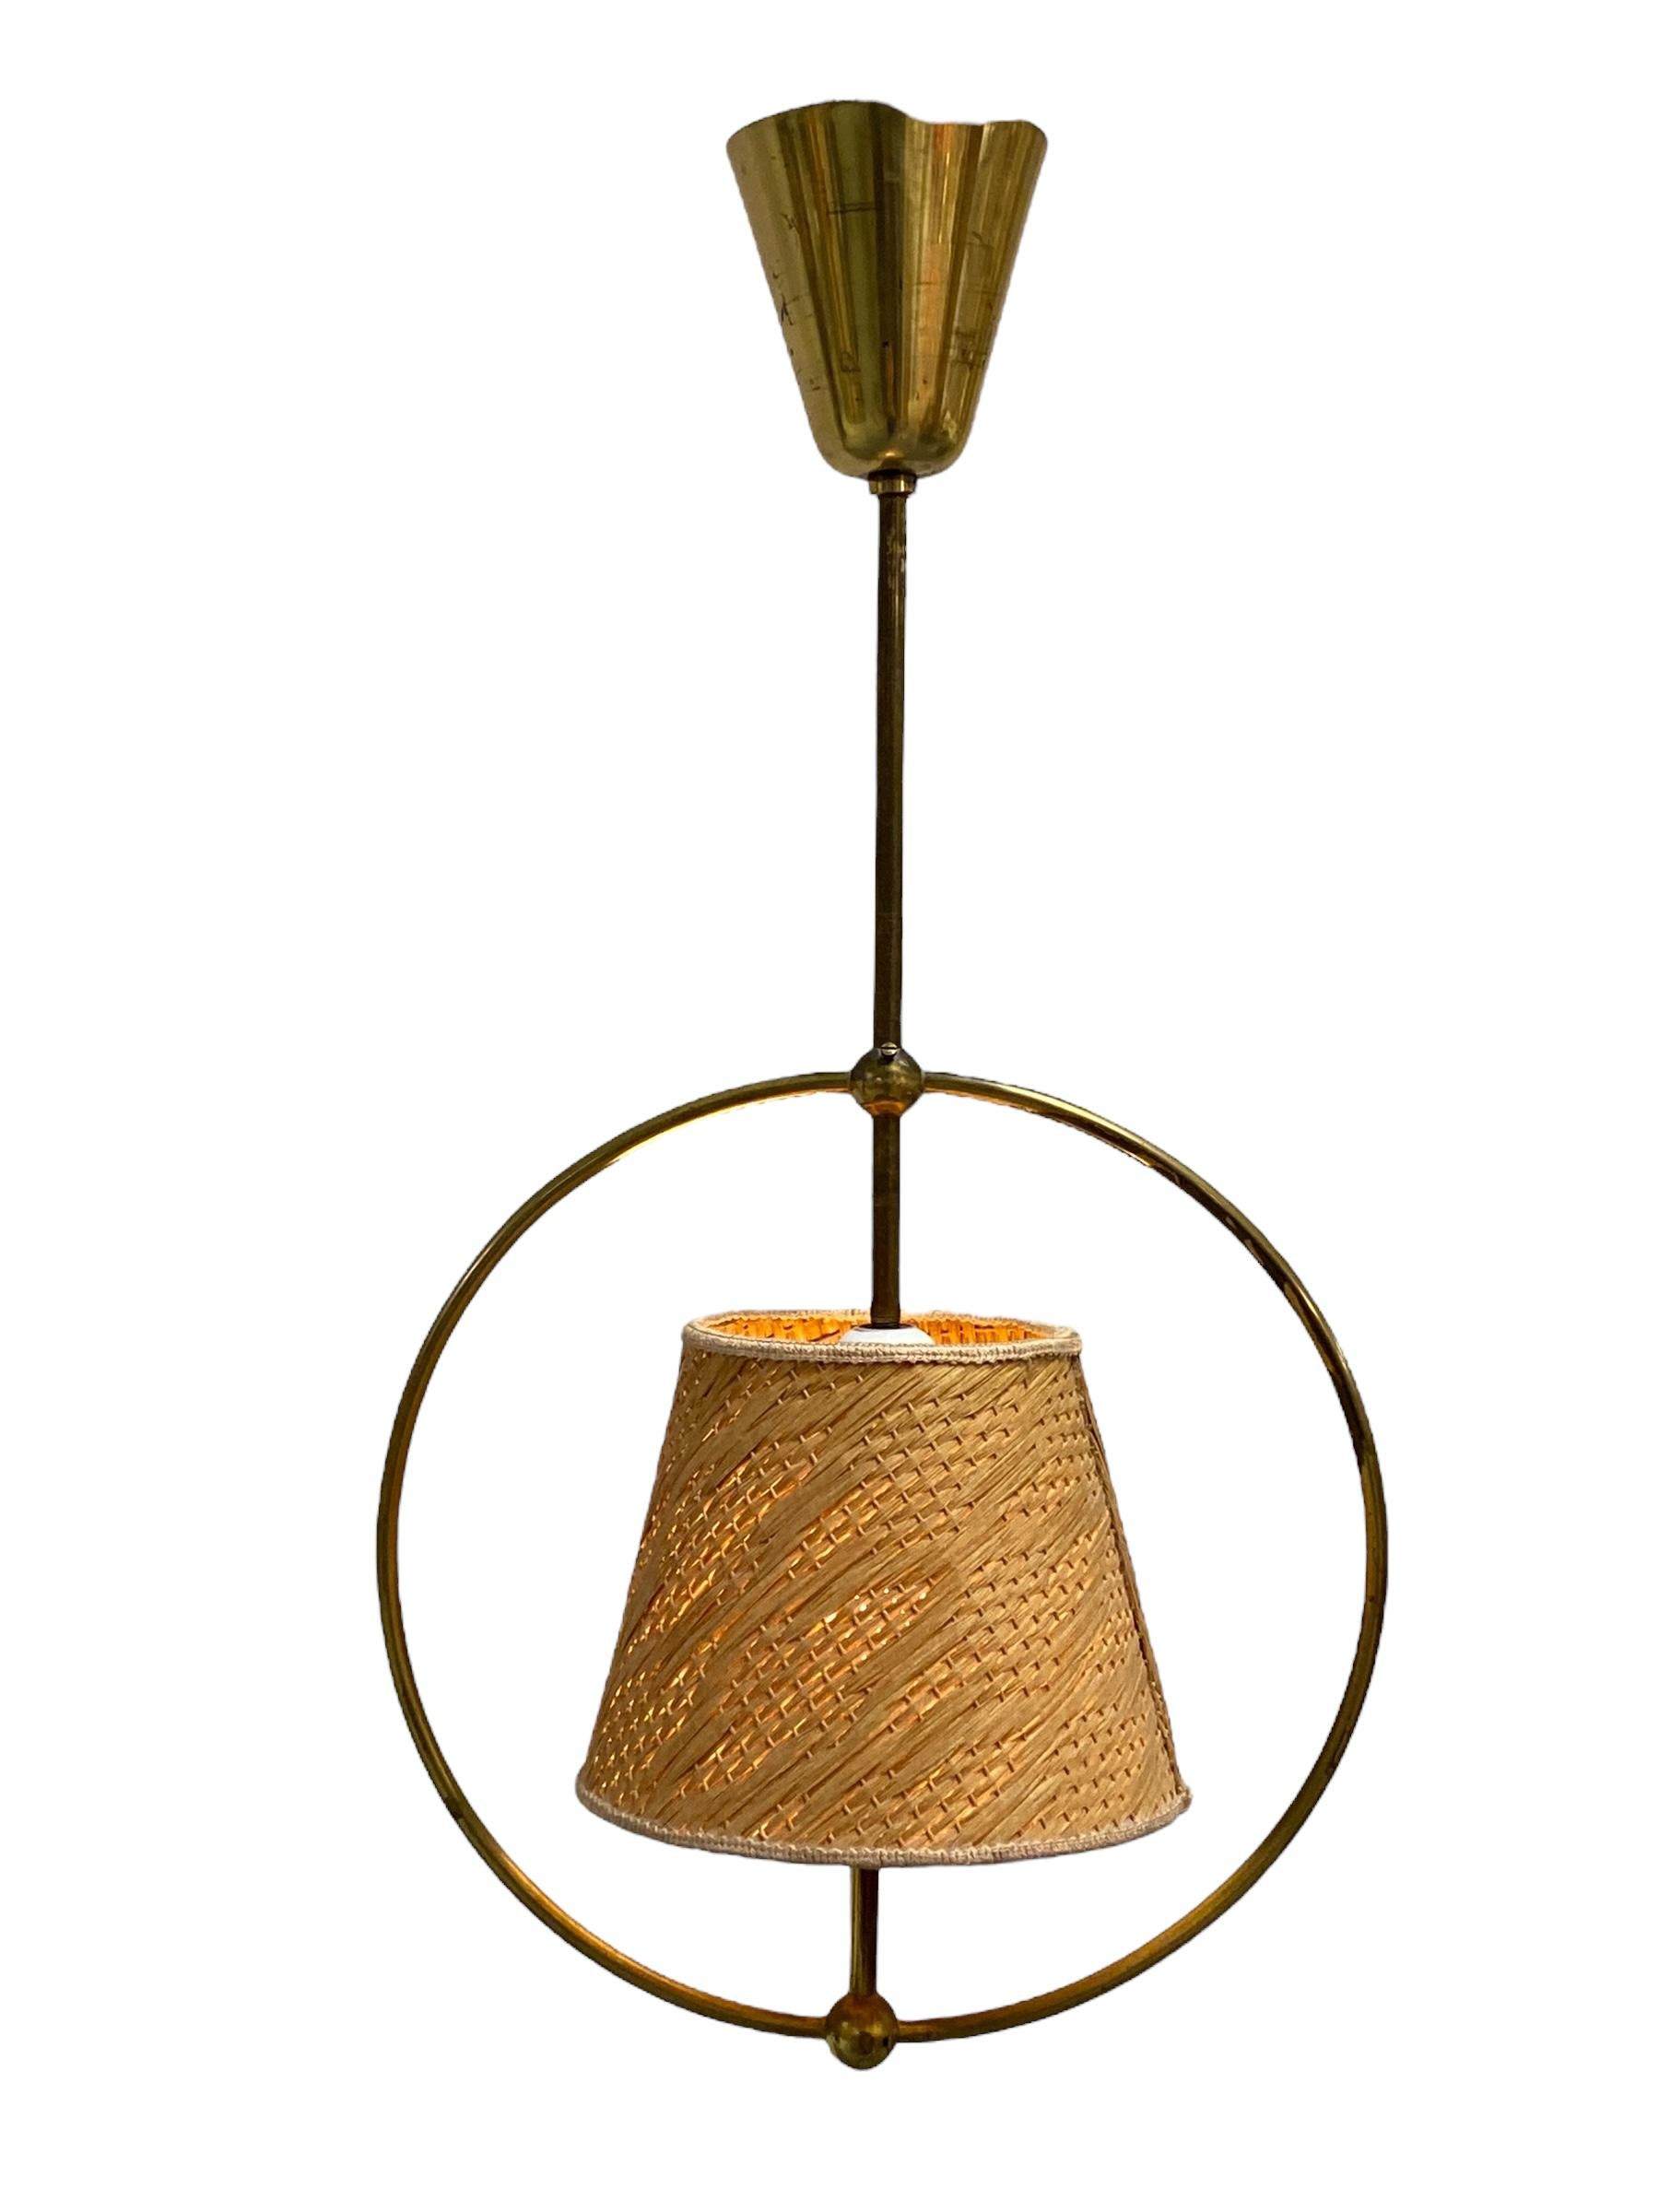 Ceiling lamp model 50591, designed by Maria Lindeman and manufactured by Idman Oy in Finland in The 1950s. A beautiful and distinct design, that stands out from the usual Idman production. Also in great original condition.

Maria Lindeman took part